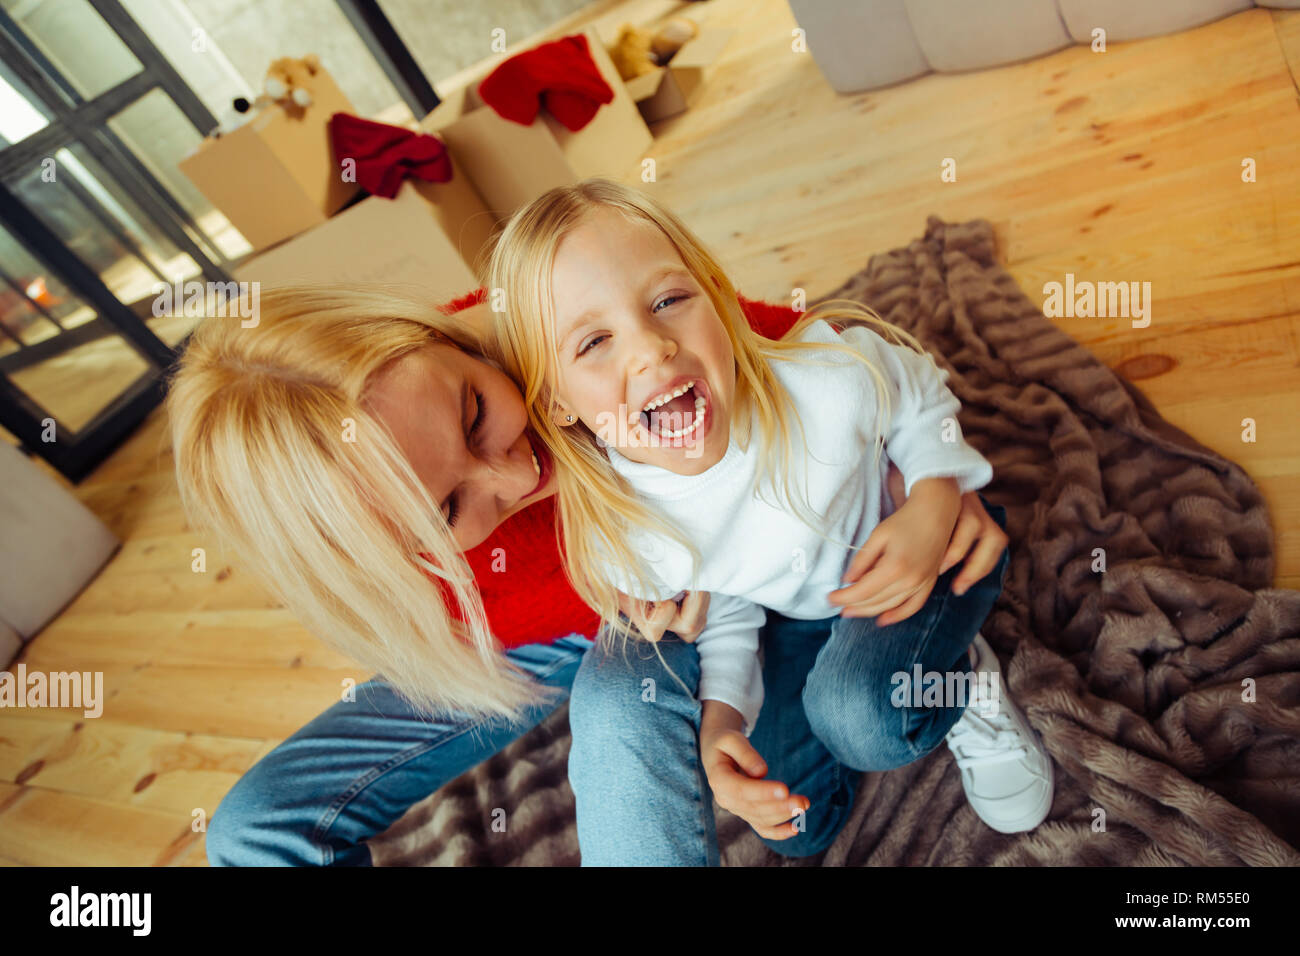 Cheerful blonde girl laughing tandis que chatouillement Banque D'Images